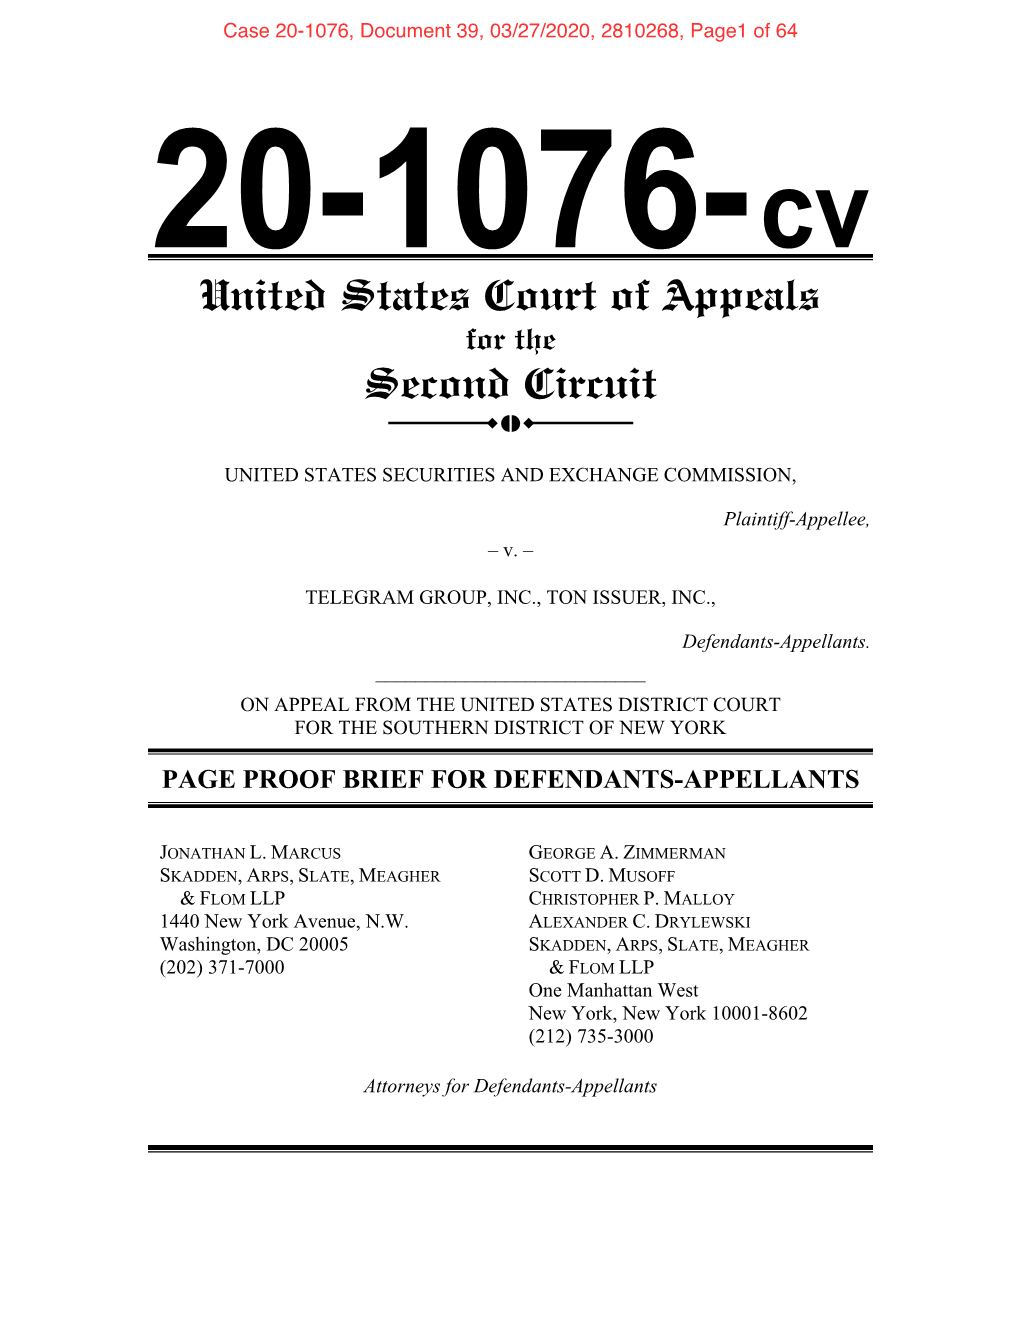 United States Court of Appeals for the Second Circuit ��� 